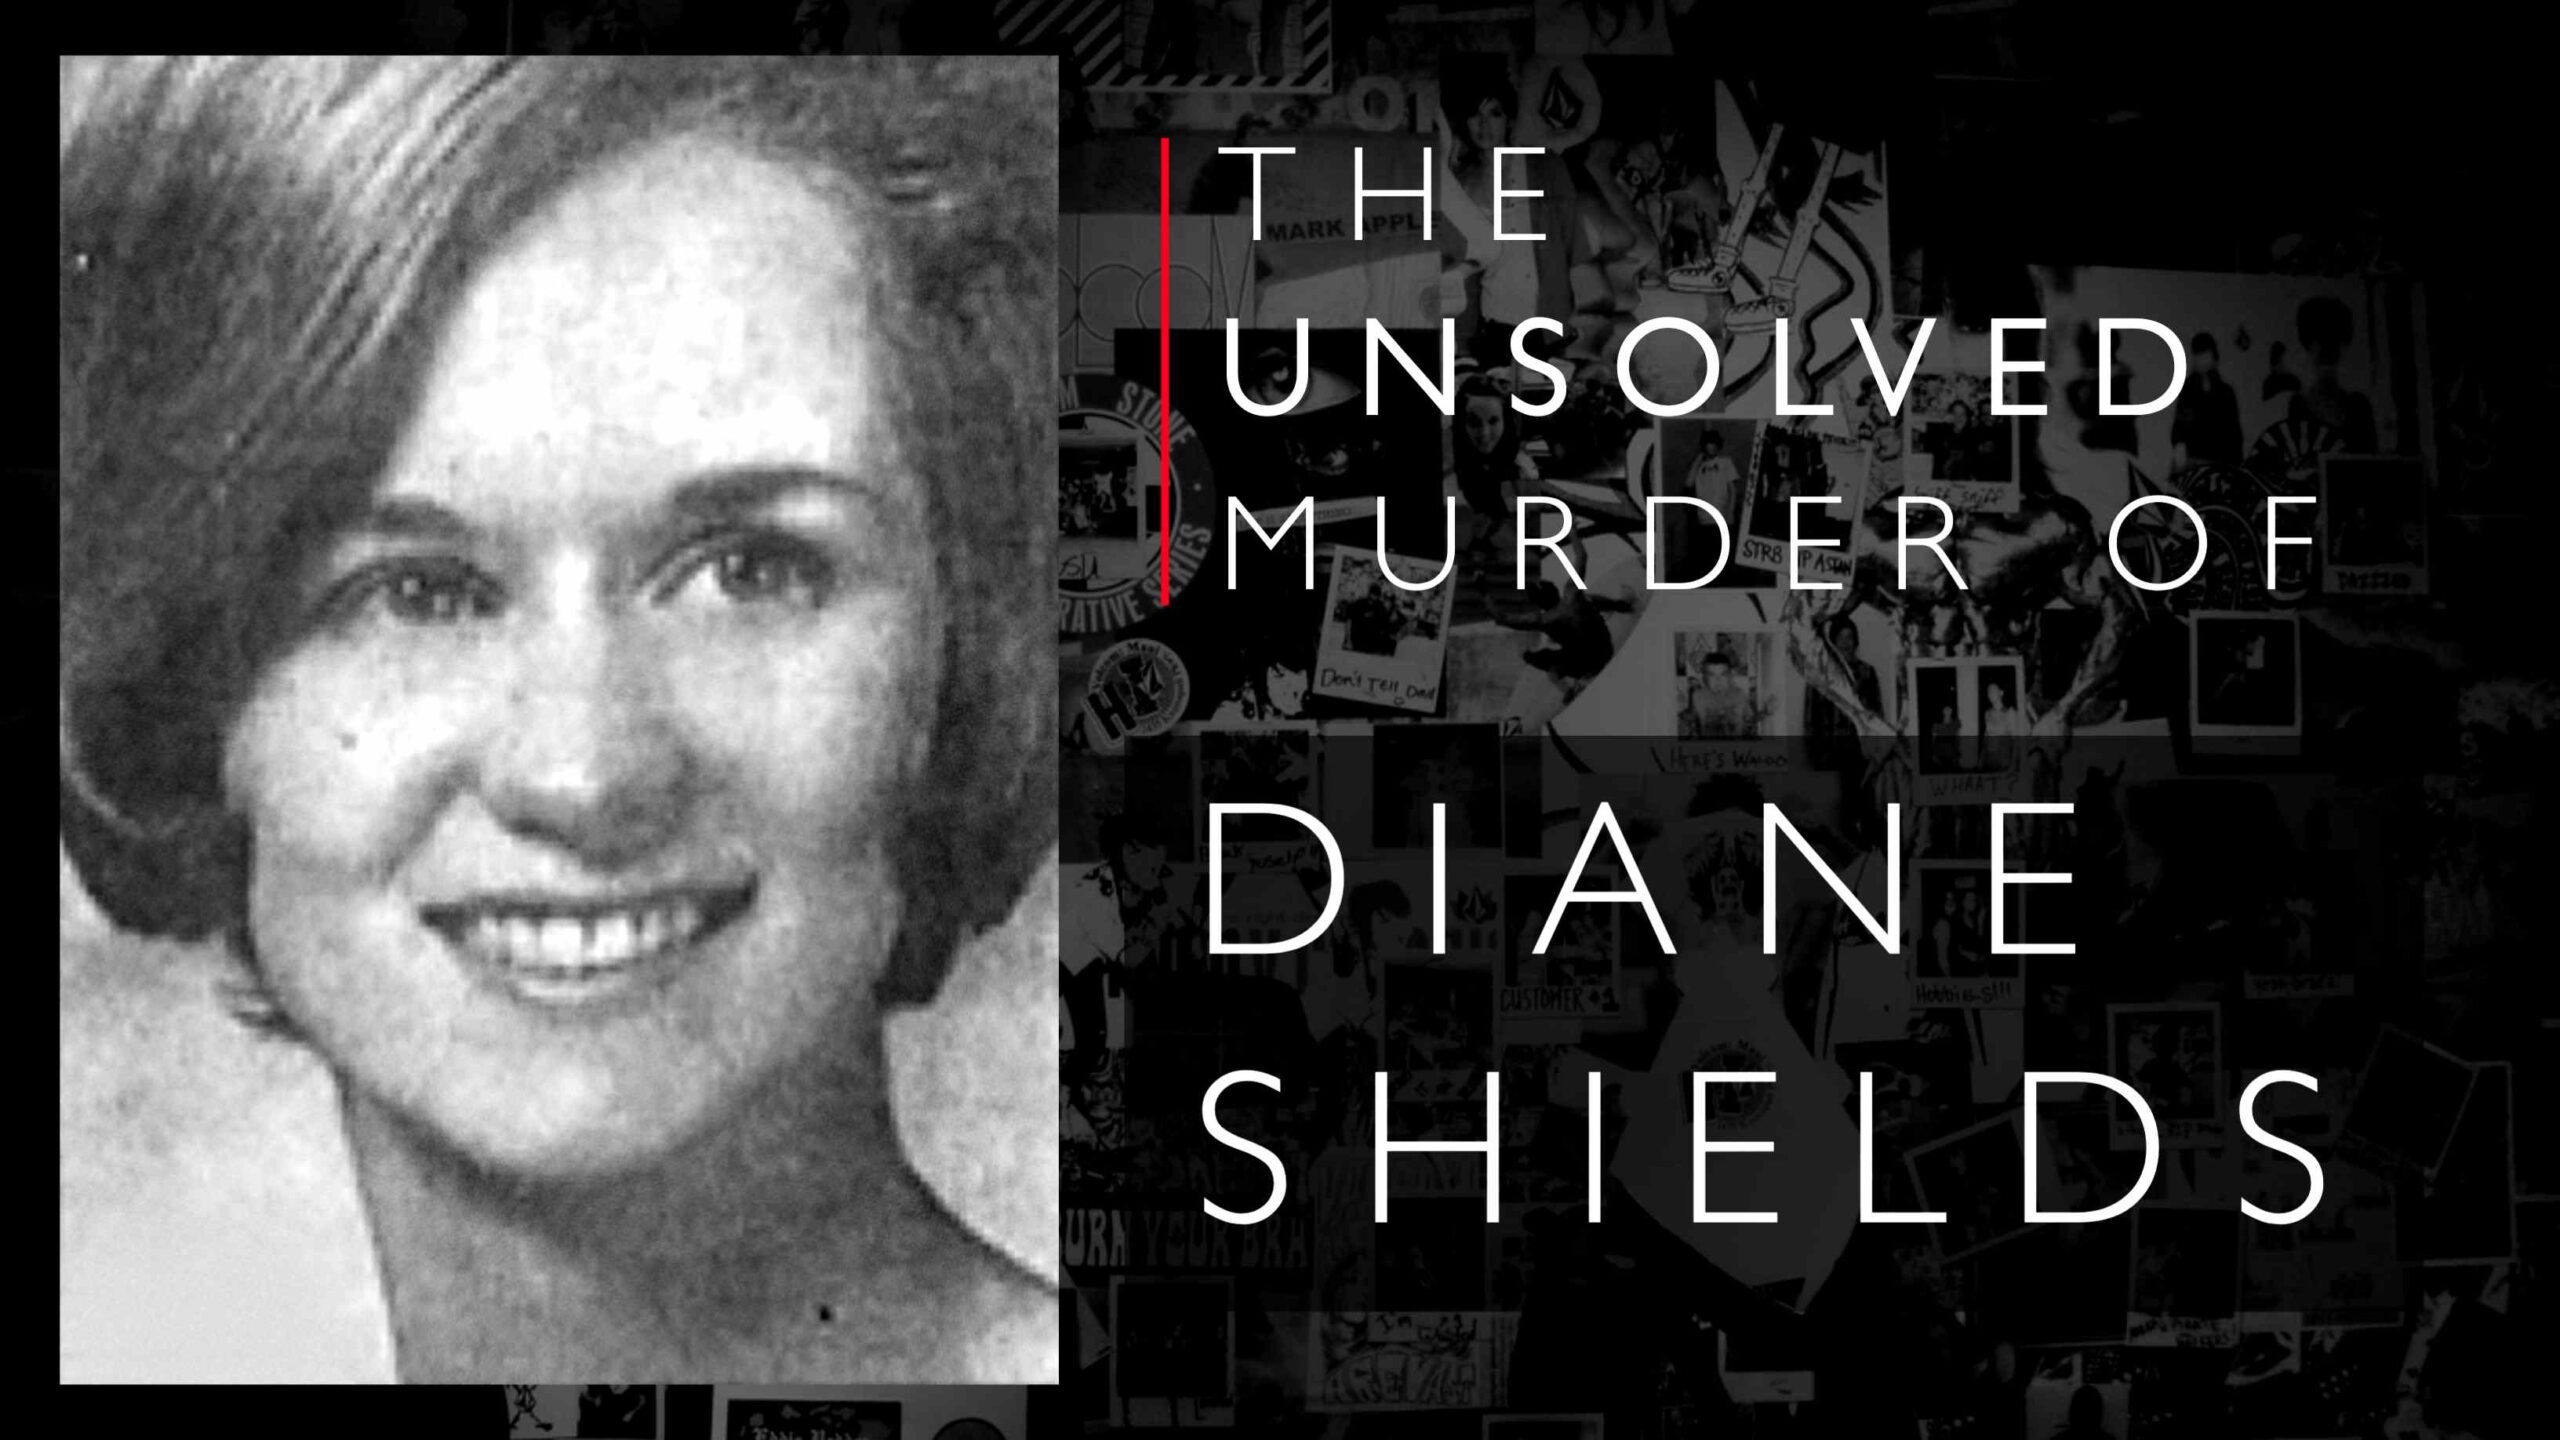 Diane Shields in some ways followed in the footsteps of Mary Shotwell Little, then was found murdered.